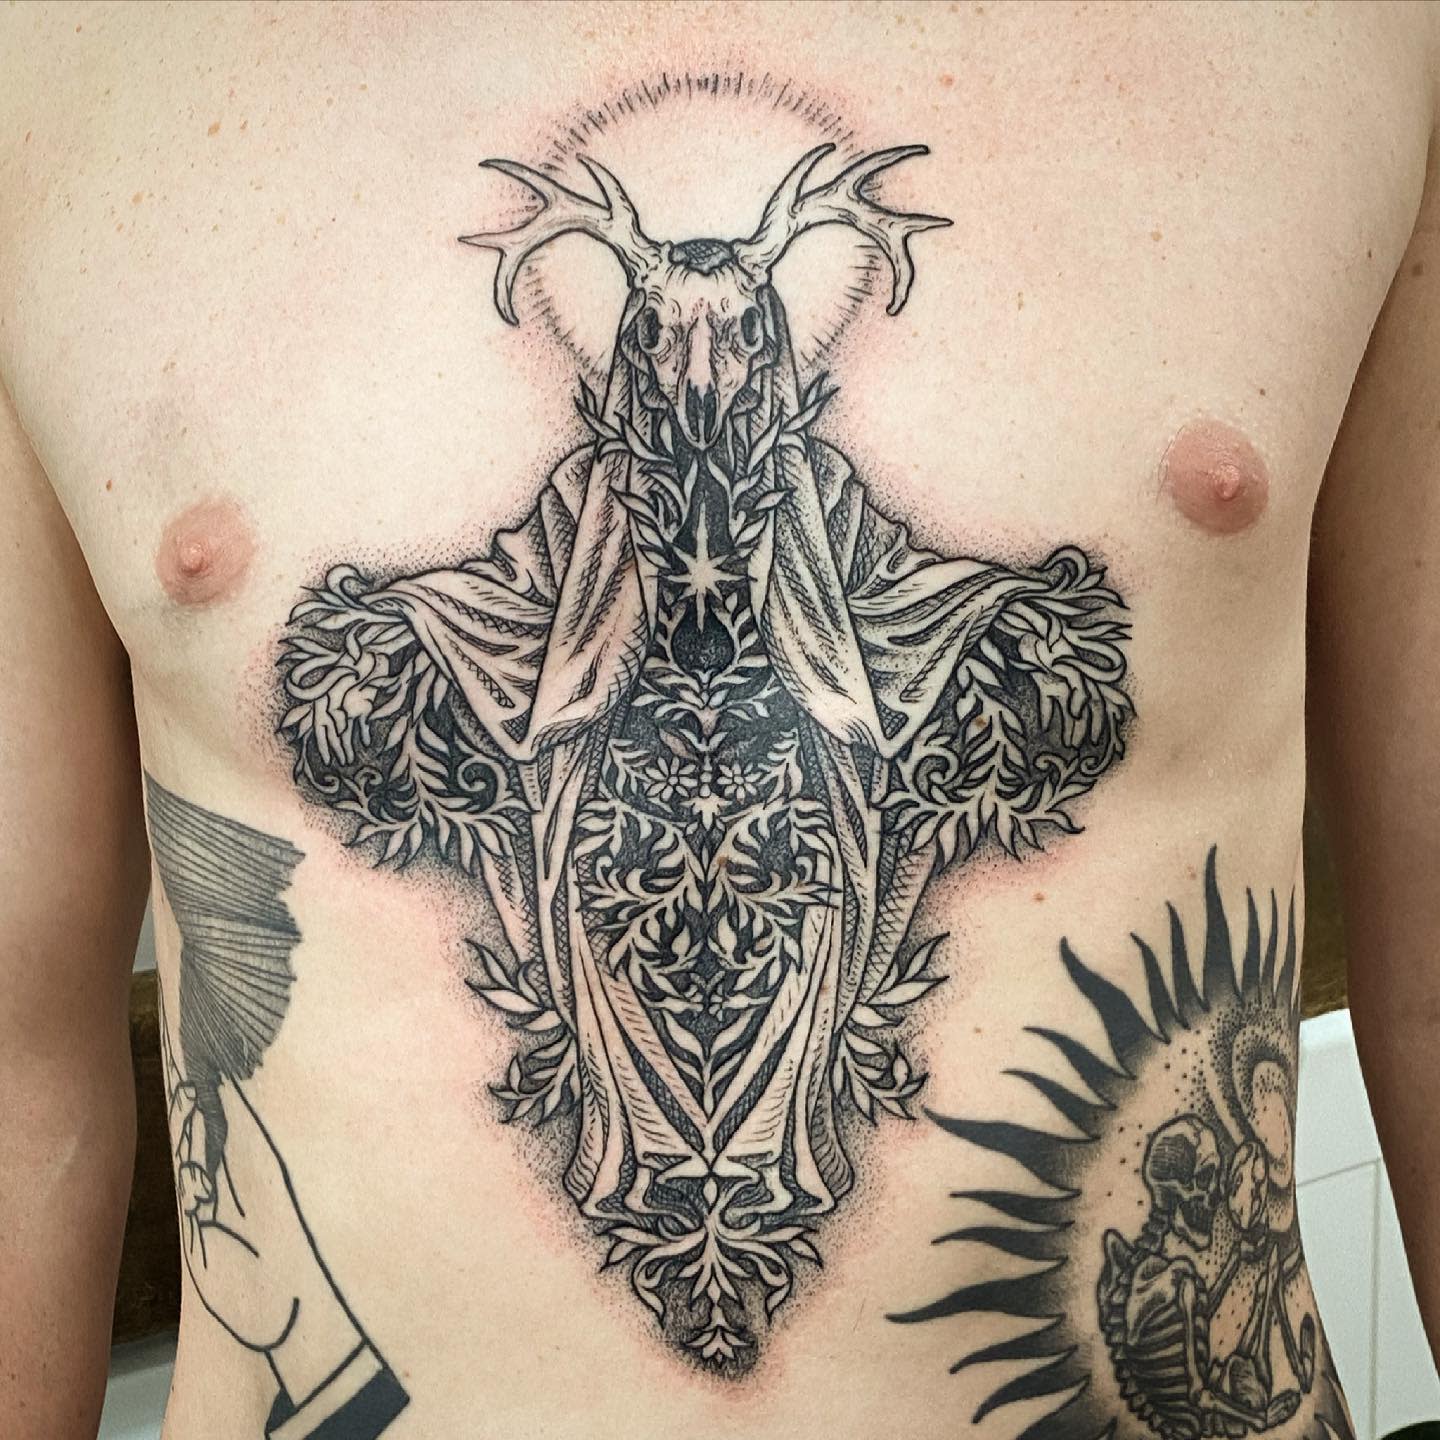 bek  on Instagram Xenomorph chest piece   thanks so much Chris  This was a super fun piece to put together  torontotattooartist tattoos  nature